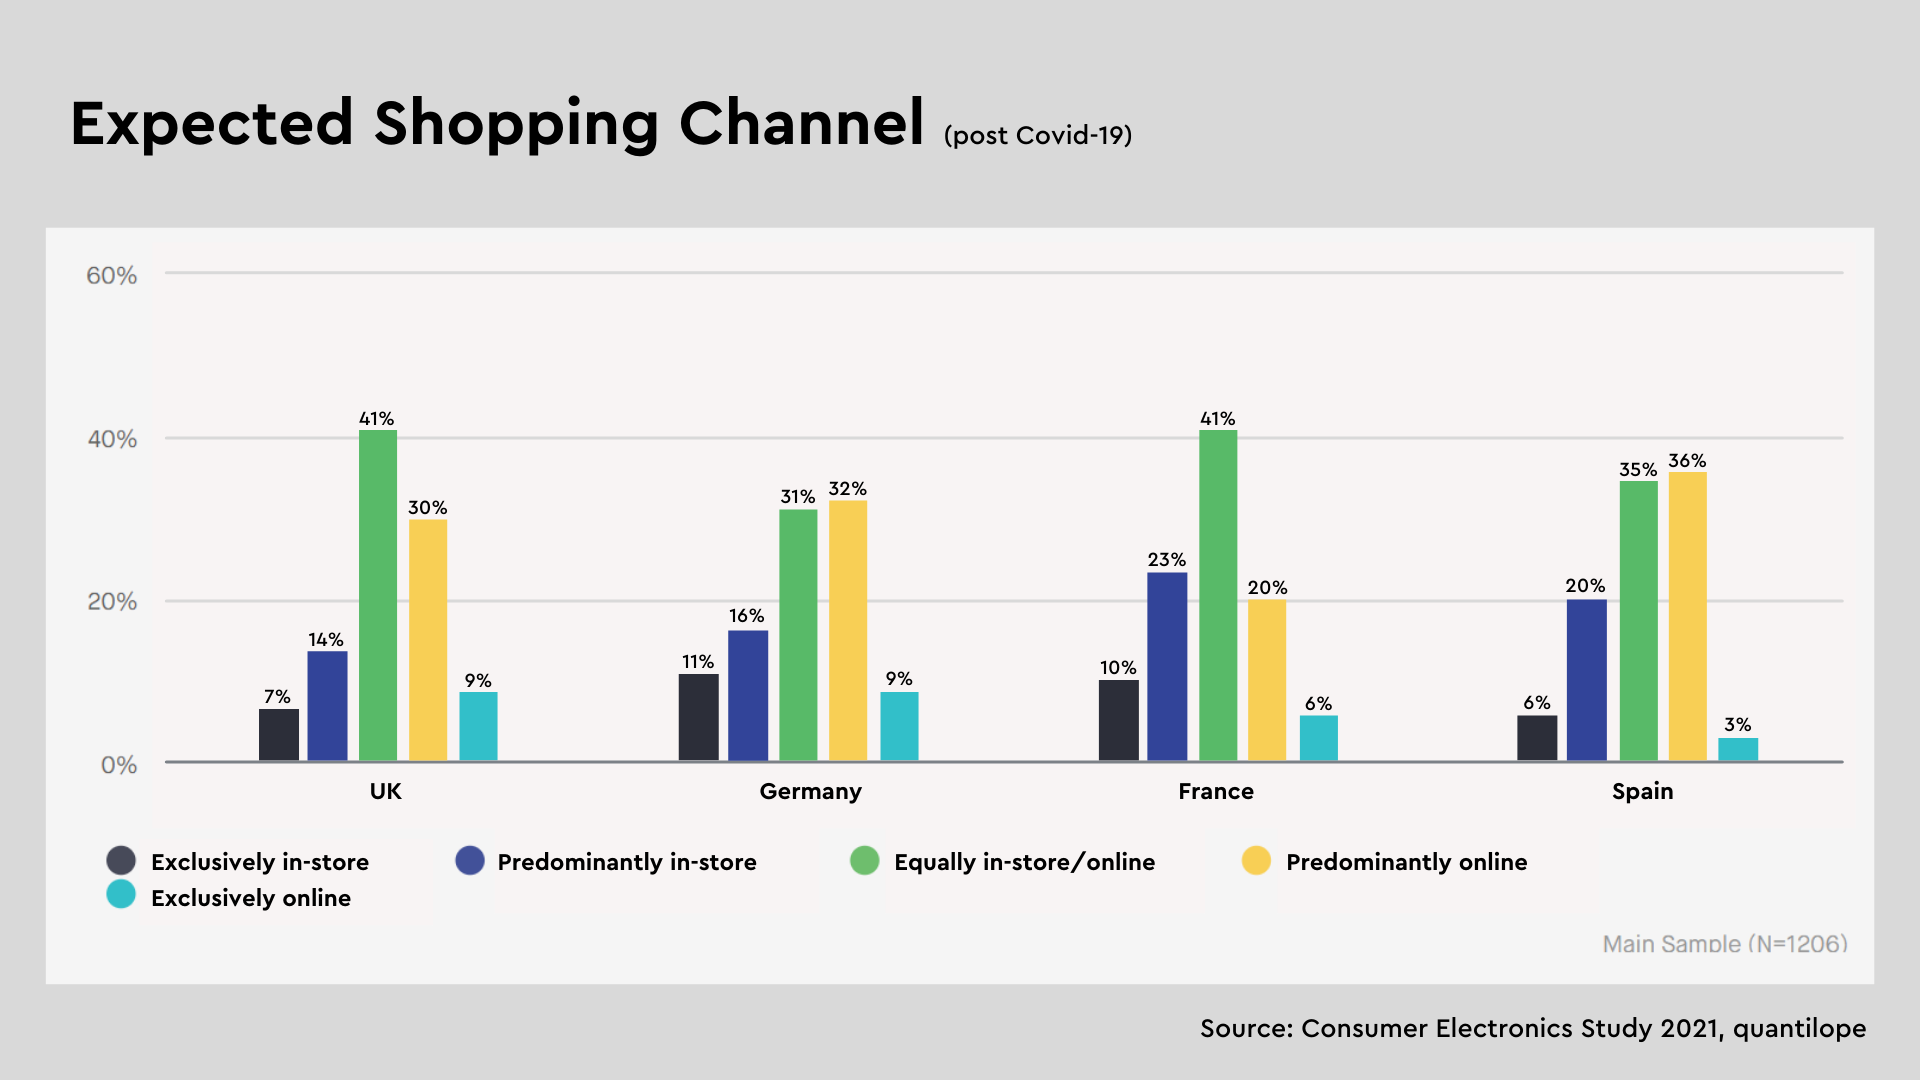 Expected-shopping-channel-consumer-electronics-2021